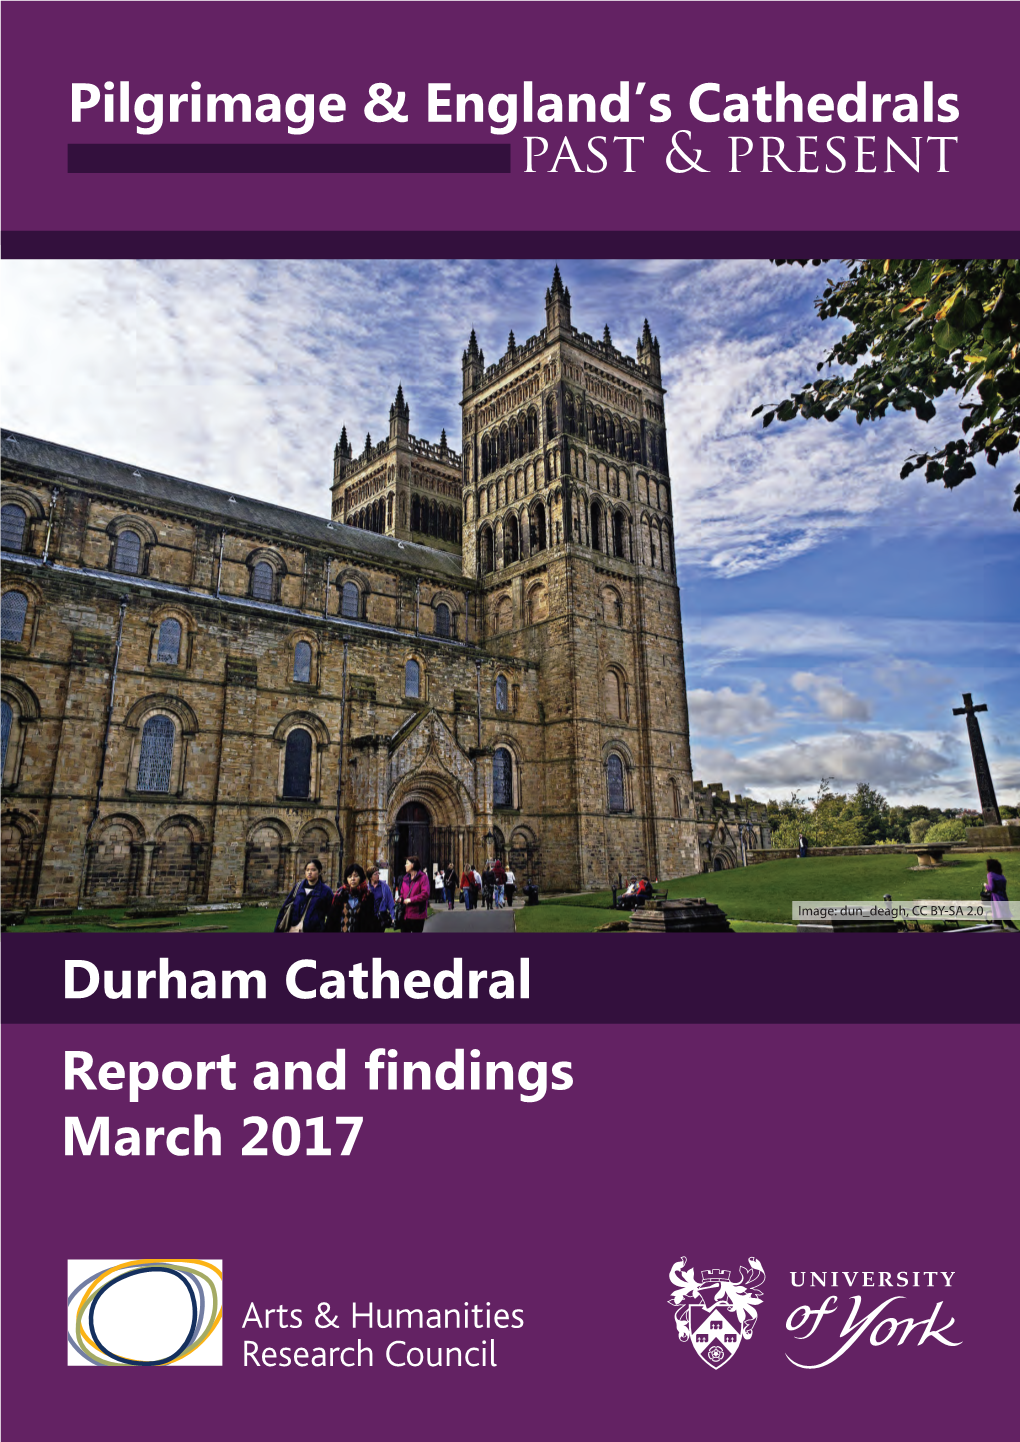 Durham Cathedral Report and Findings March 2017 Pilgrimage & England's Cathedrals Past & Present